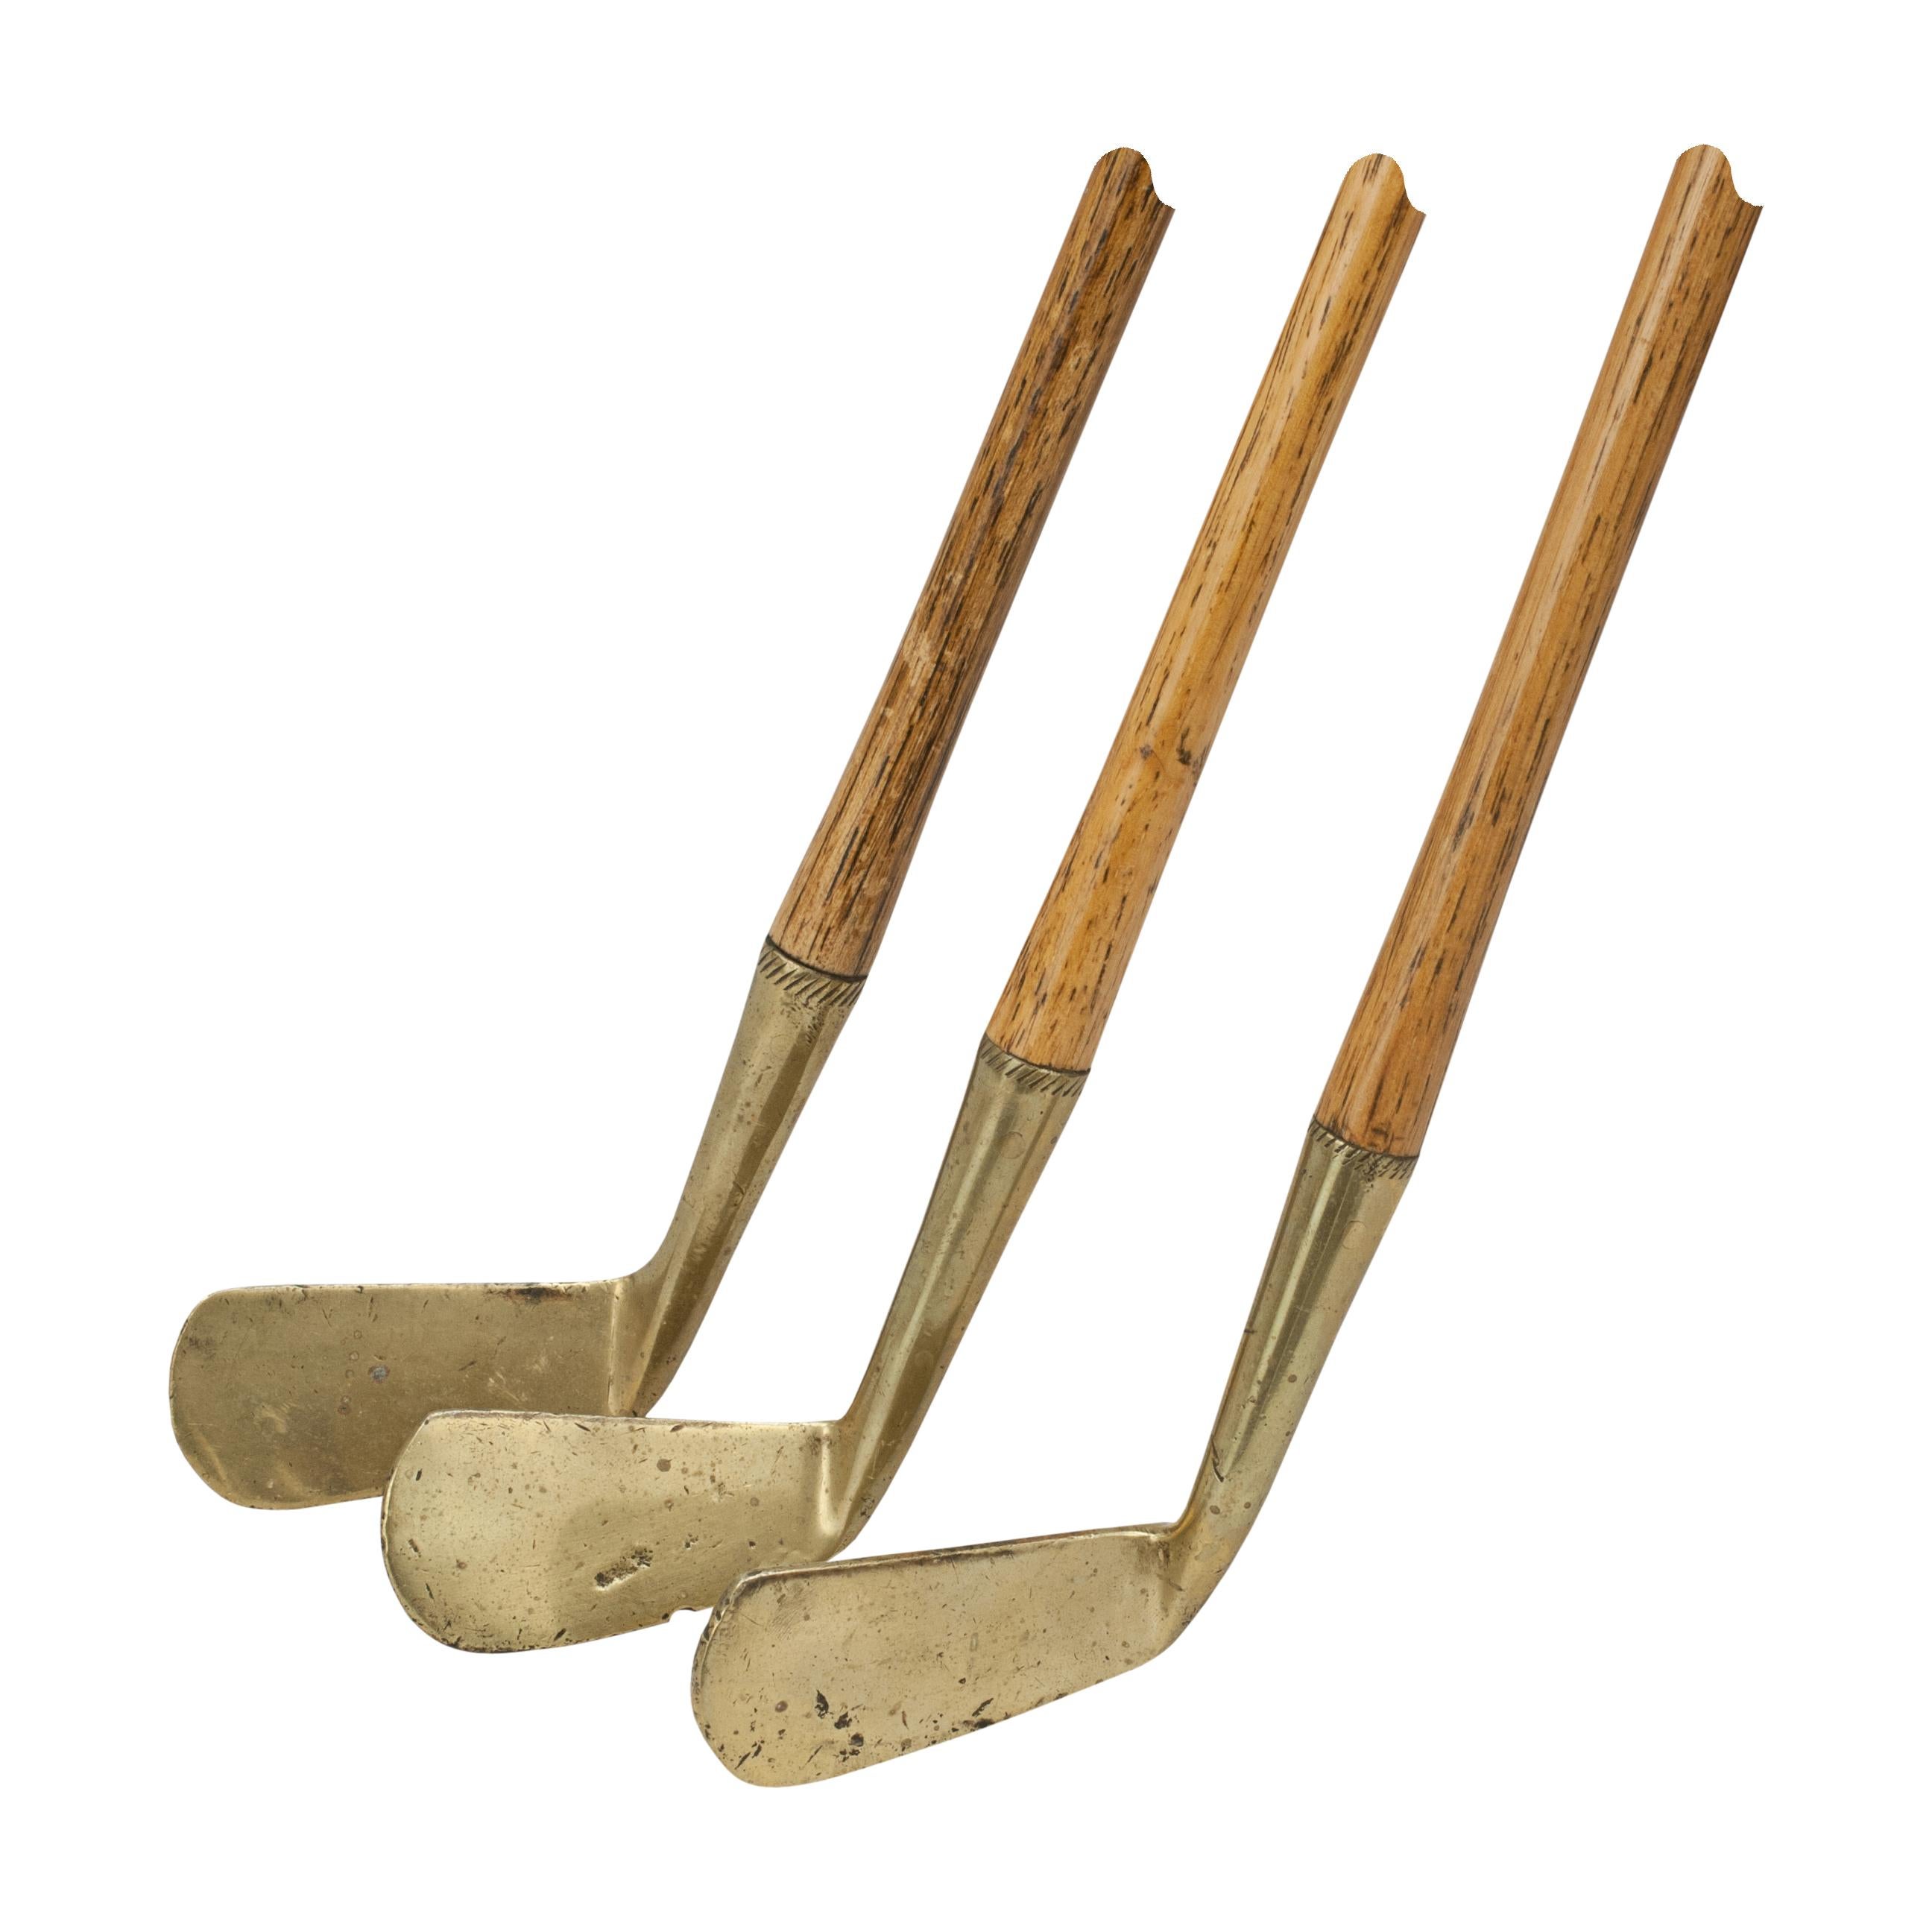 Halley & Co. Children's Hickory Golf Clubs.
Set of three child's golf clubs comprising of a iron, a mashie and a putter. All are with suede leather grips and brass heads stamped with Halley's 